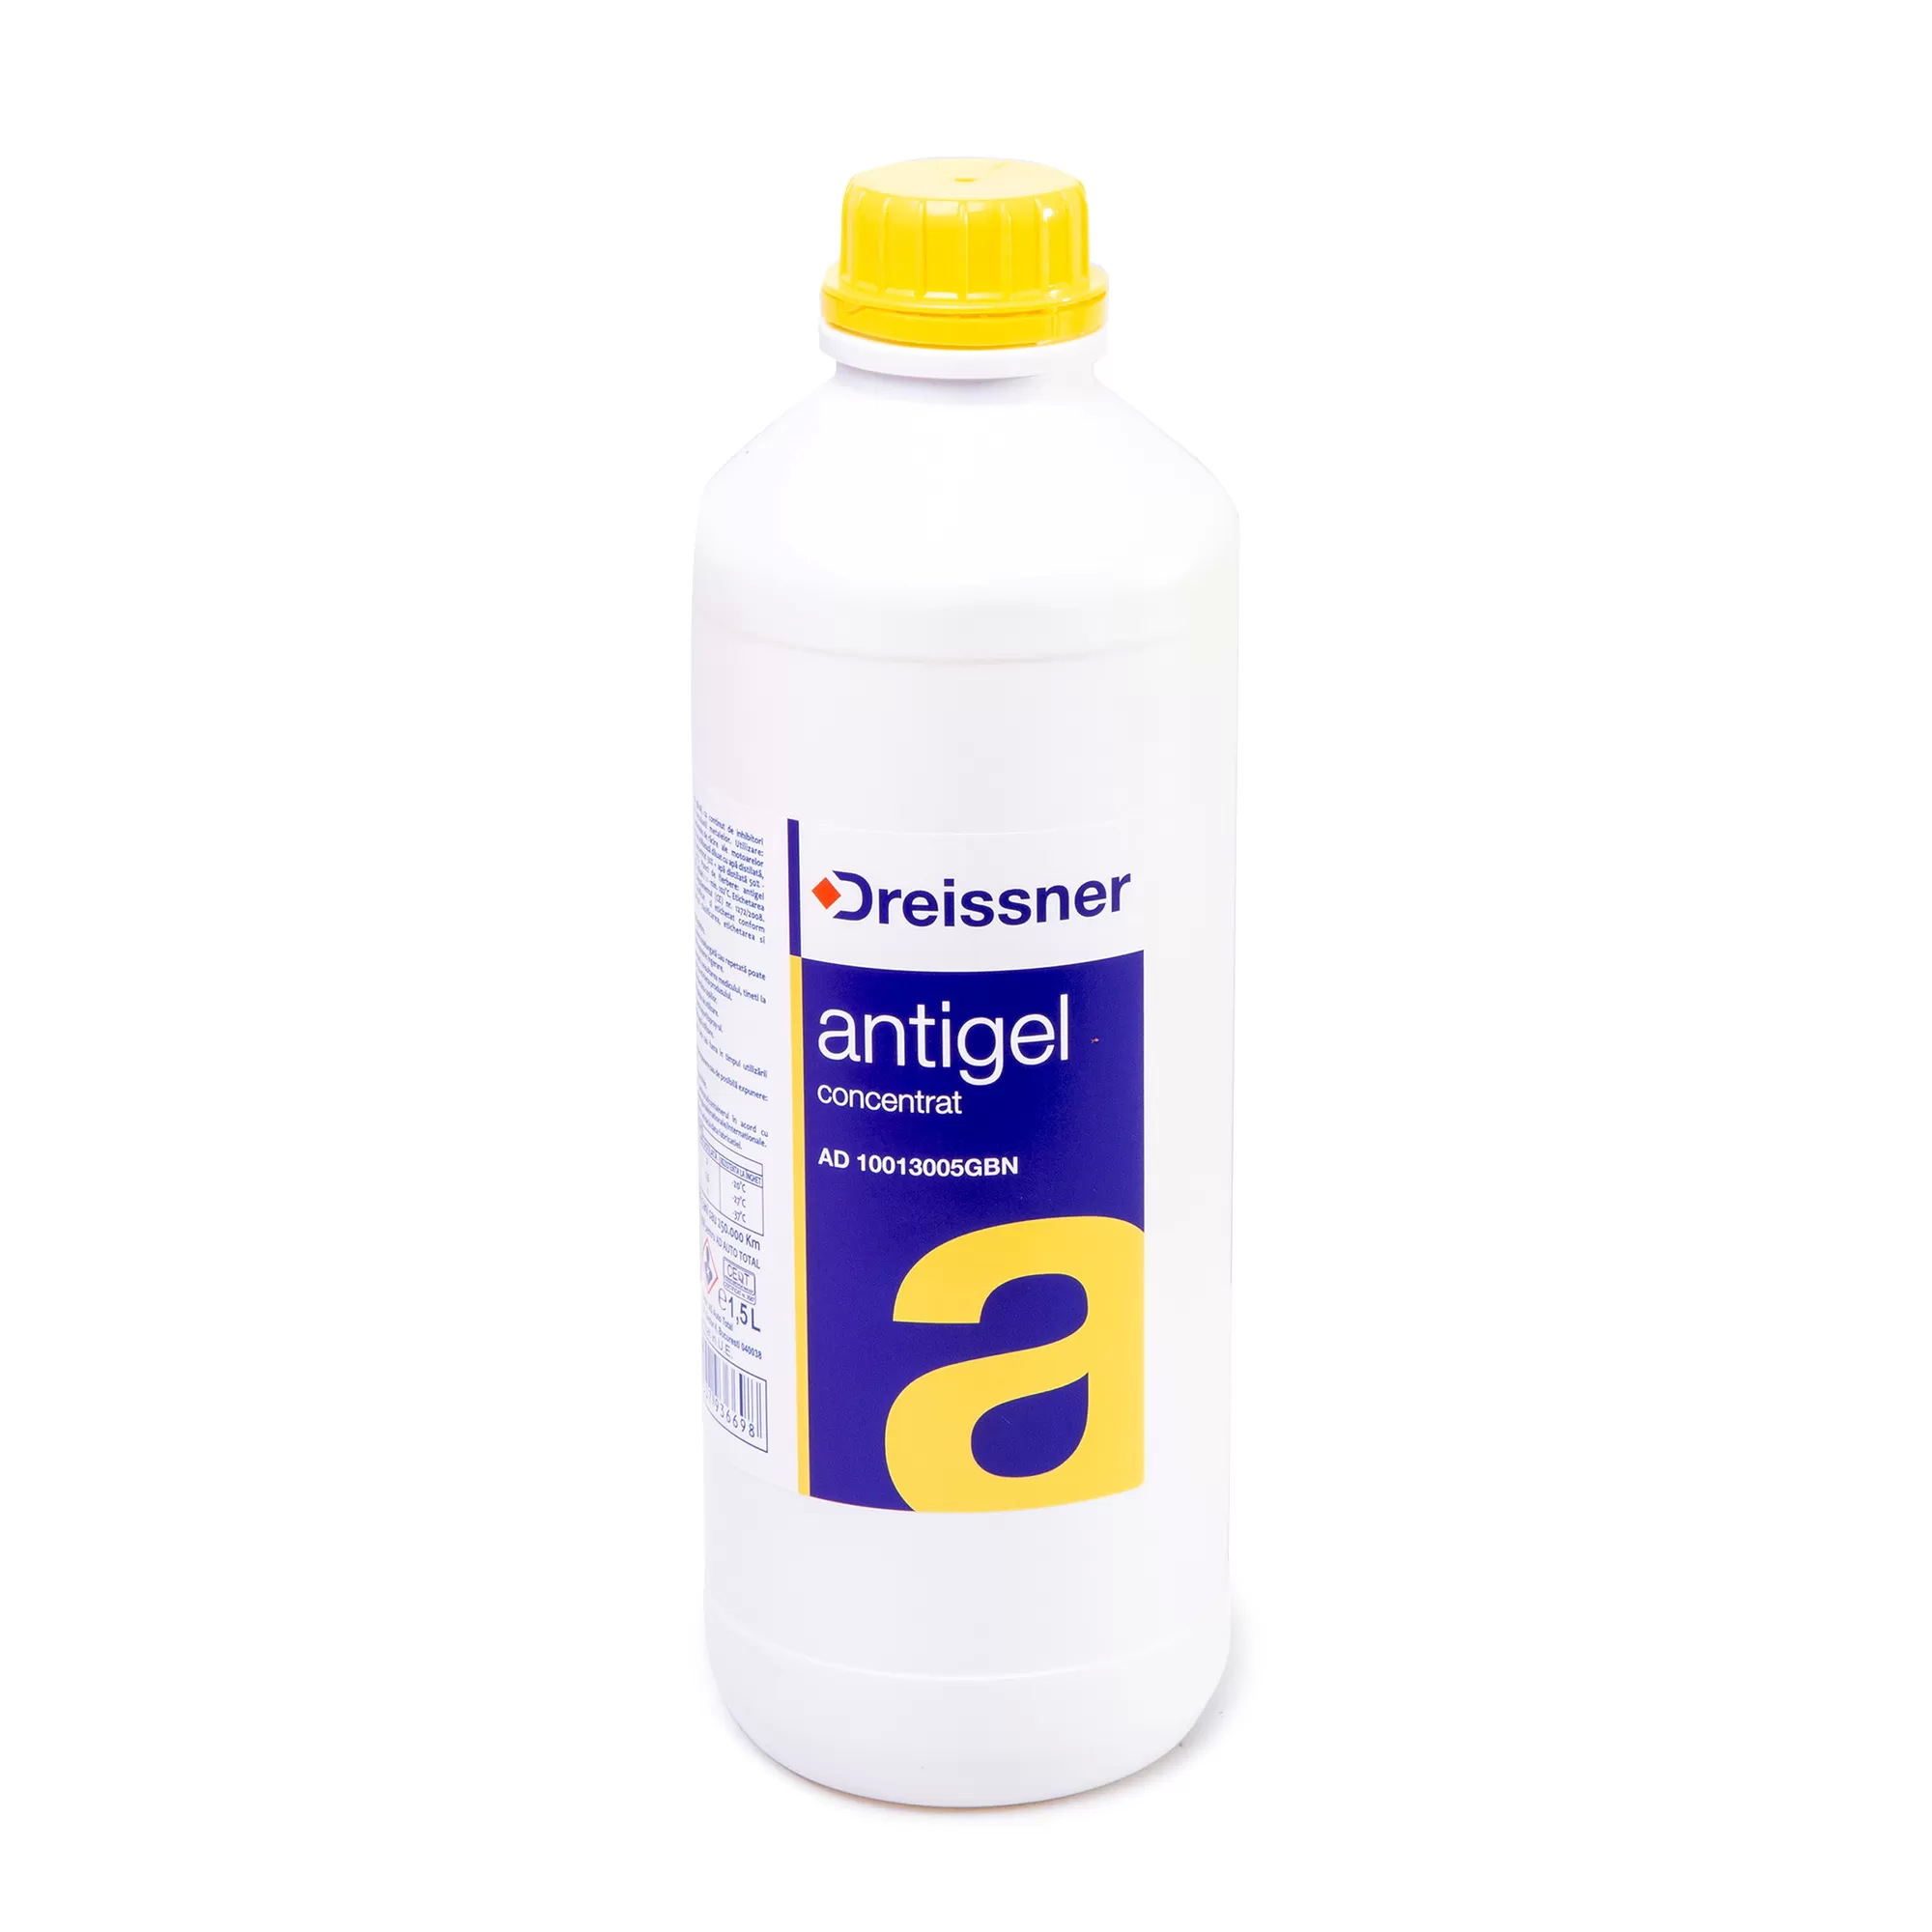 antigel concentrat galben - ad(1.5) - ad-fd AD 10013005GBN AD PRODUCTS